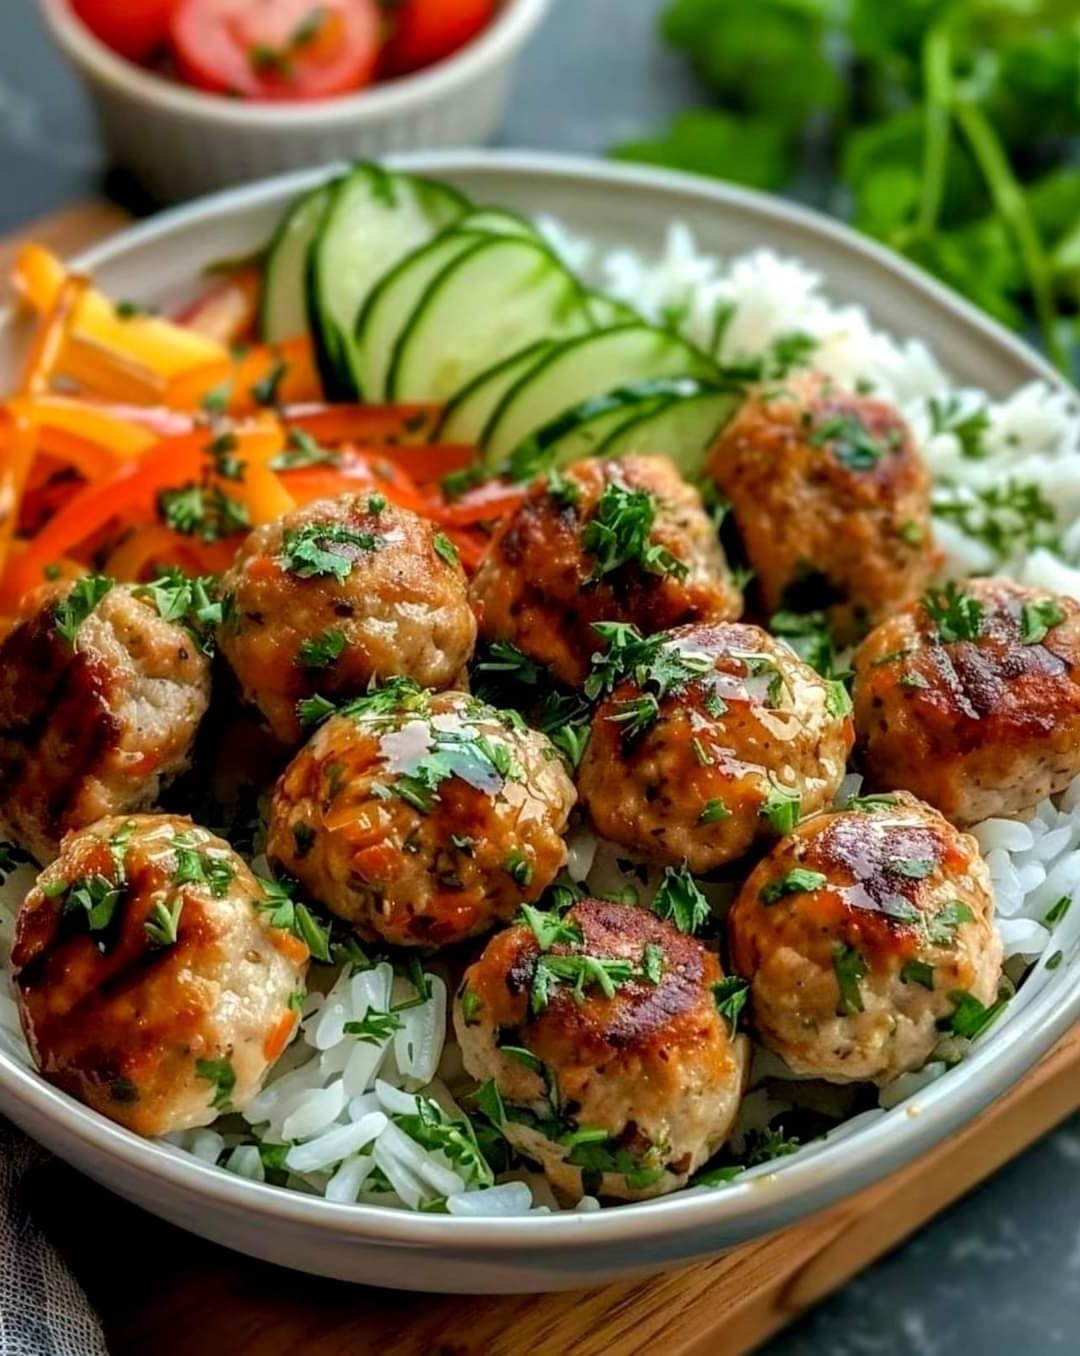 Asia Style Chicken Meatballs with Rice and Vegetables - ARAB-DATSH